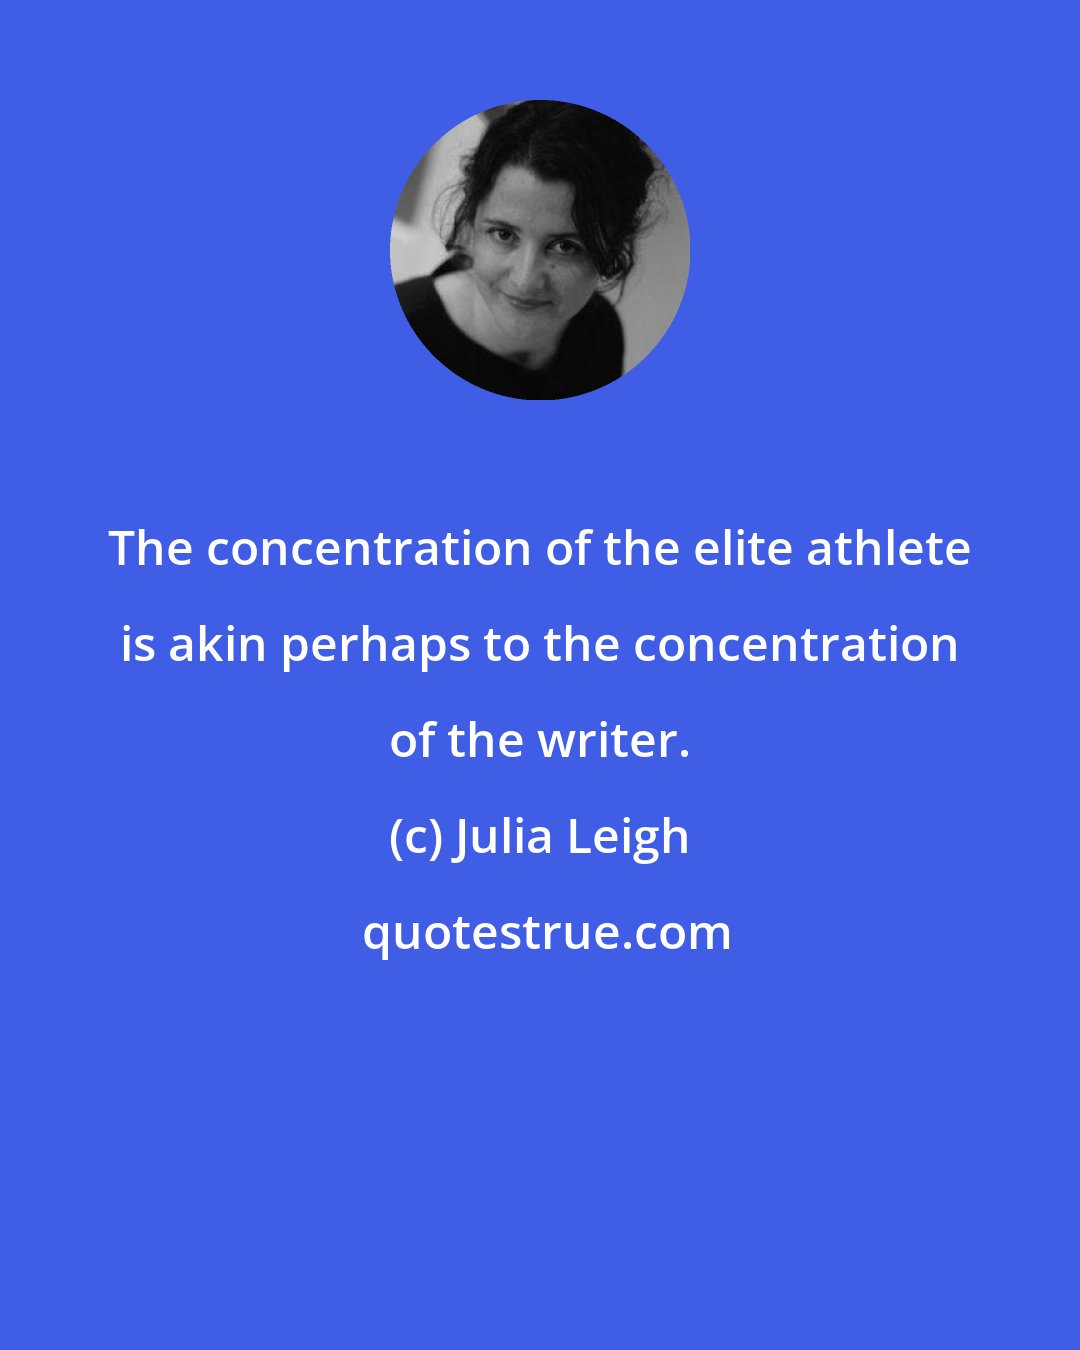 Julia Leigh: The concentration of the elite athlete is akin perhaps to the concentration of the writer.